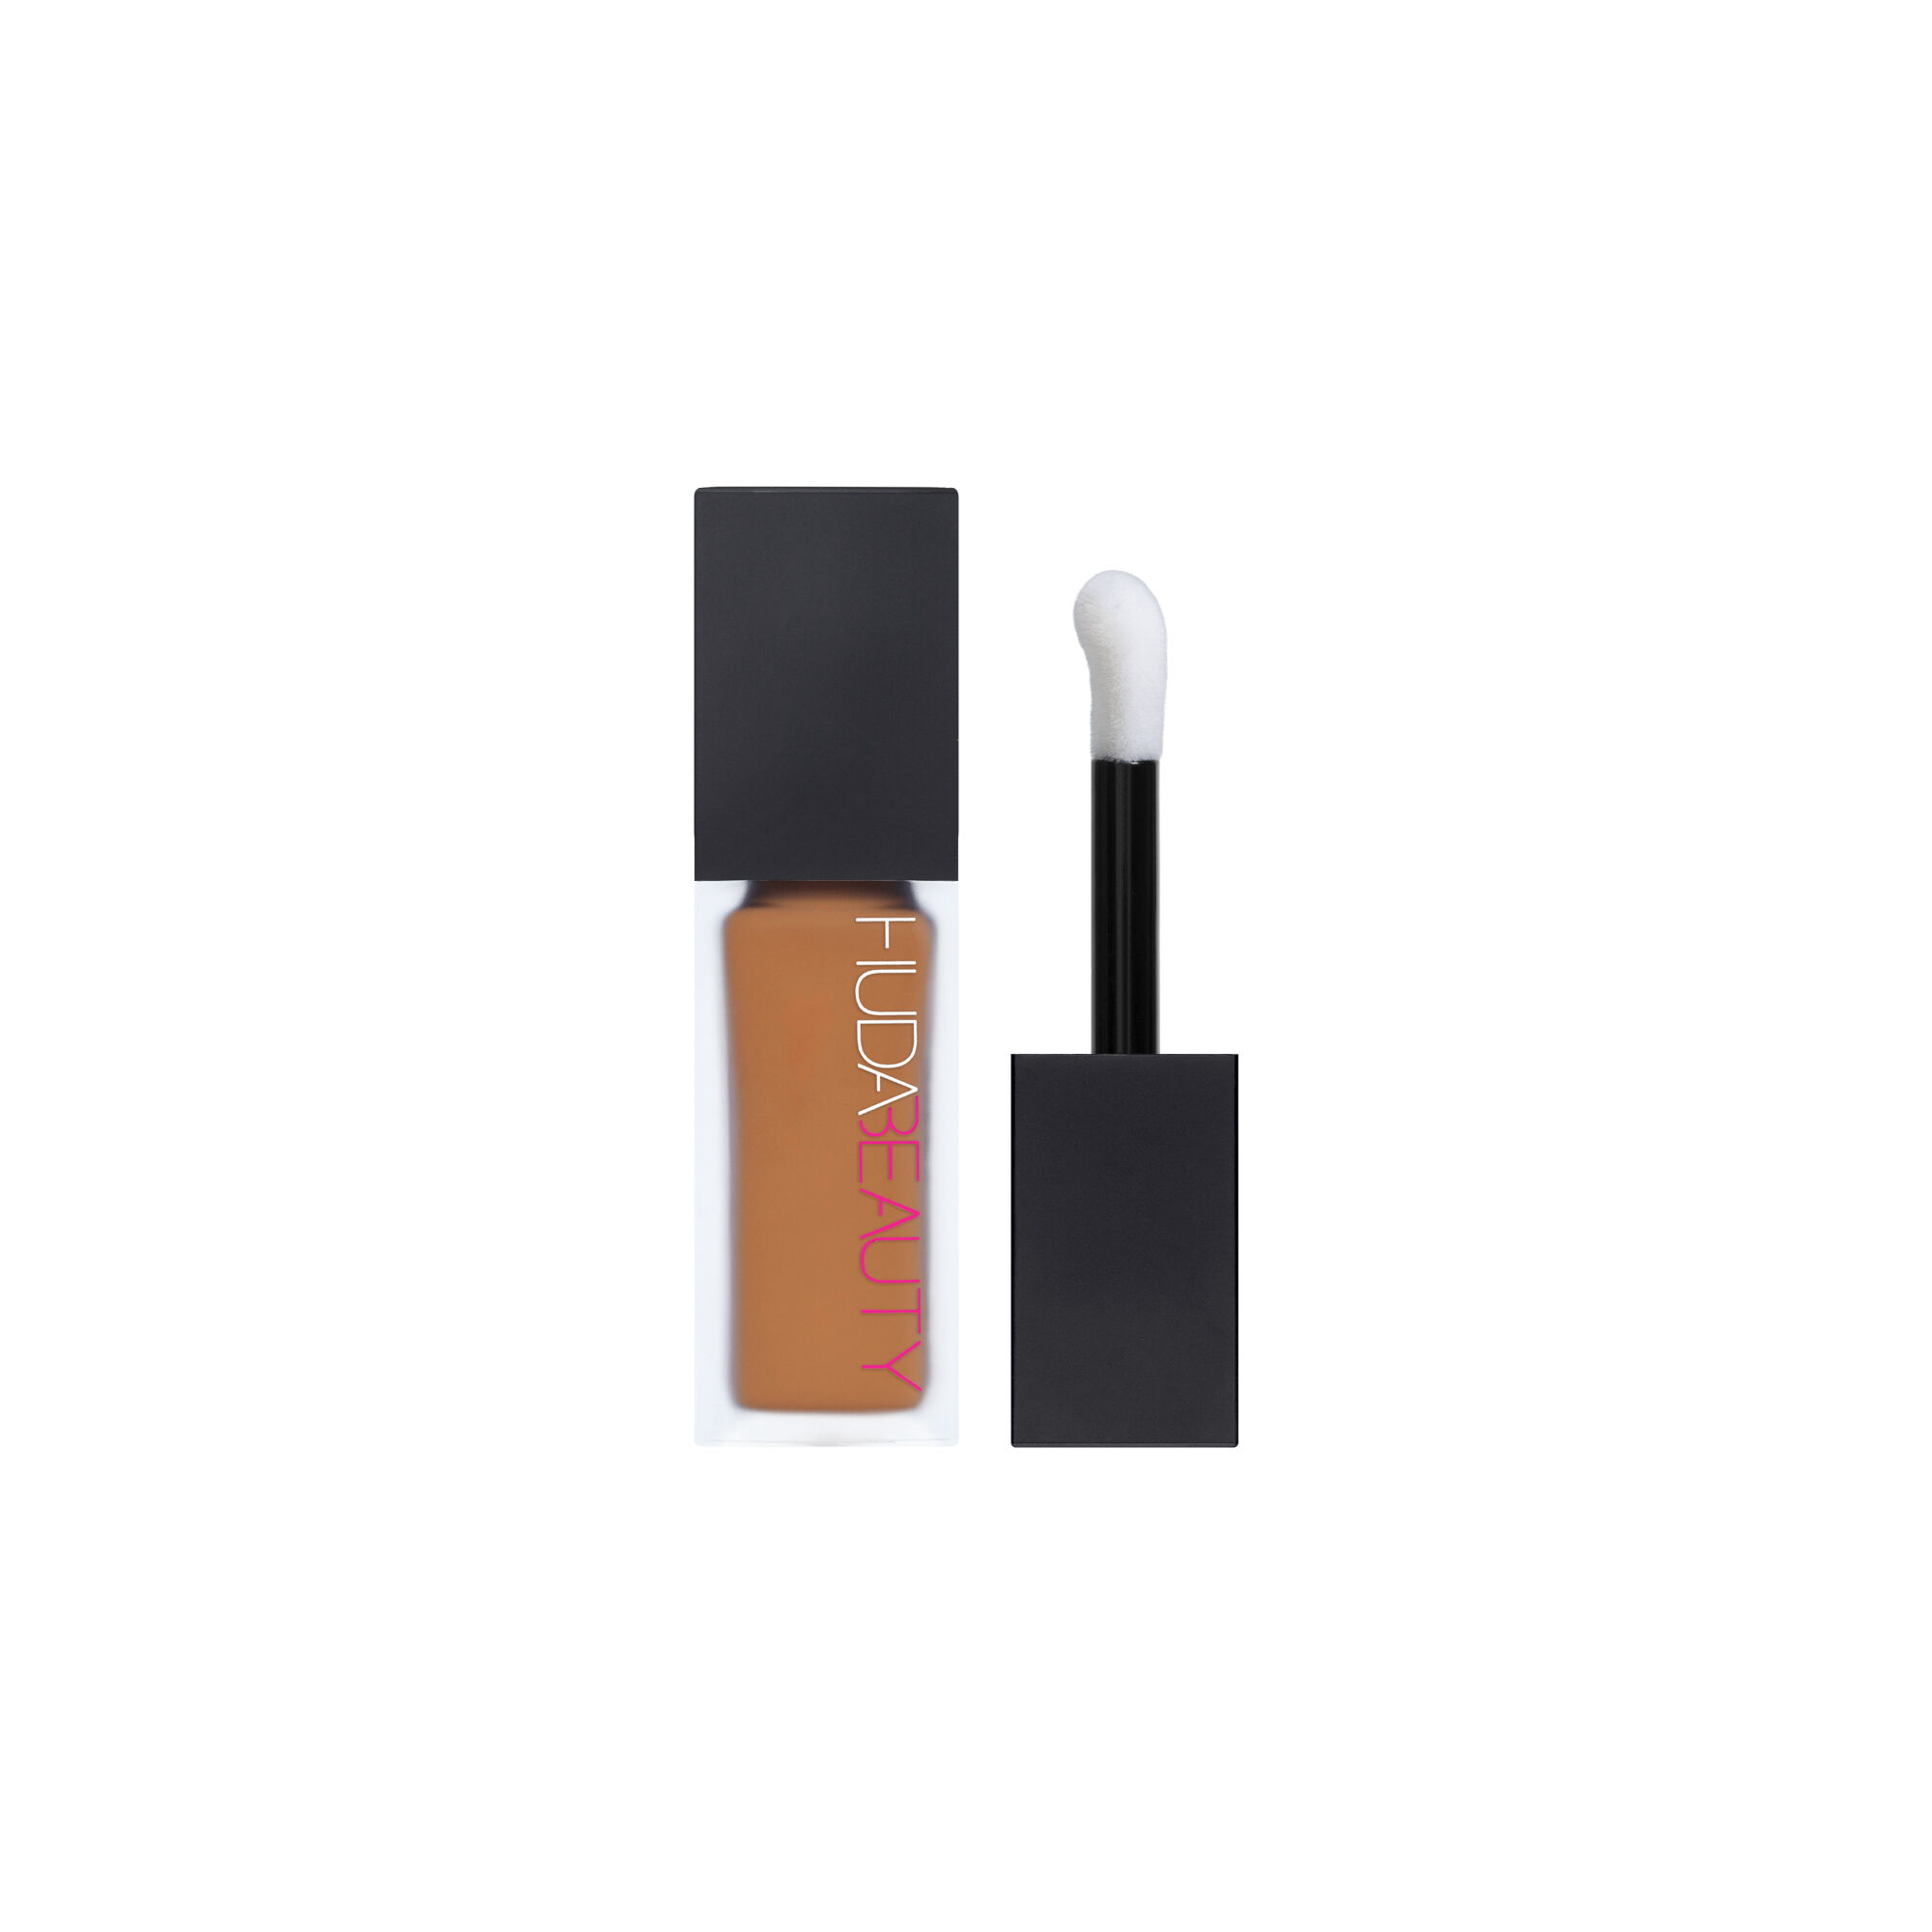 Huda Beauty Faux Filter Concealer Crumble 7.1 In Crumble 7.1n